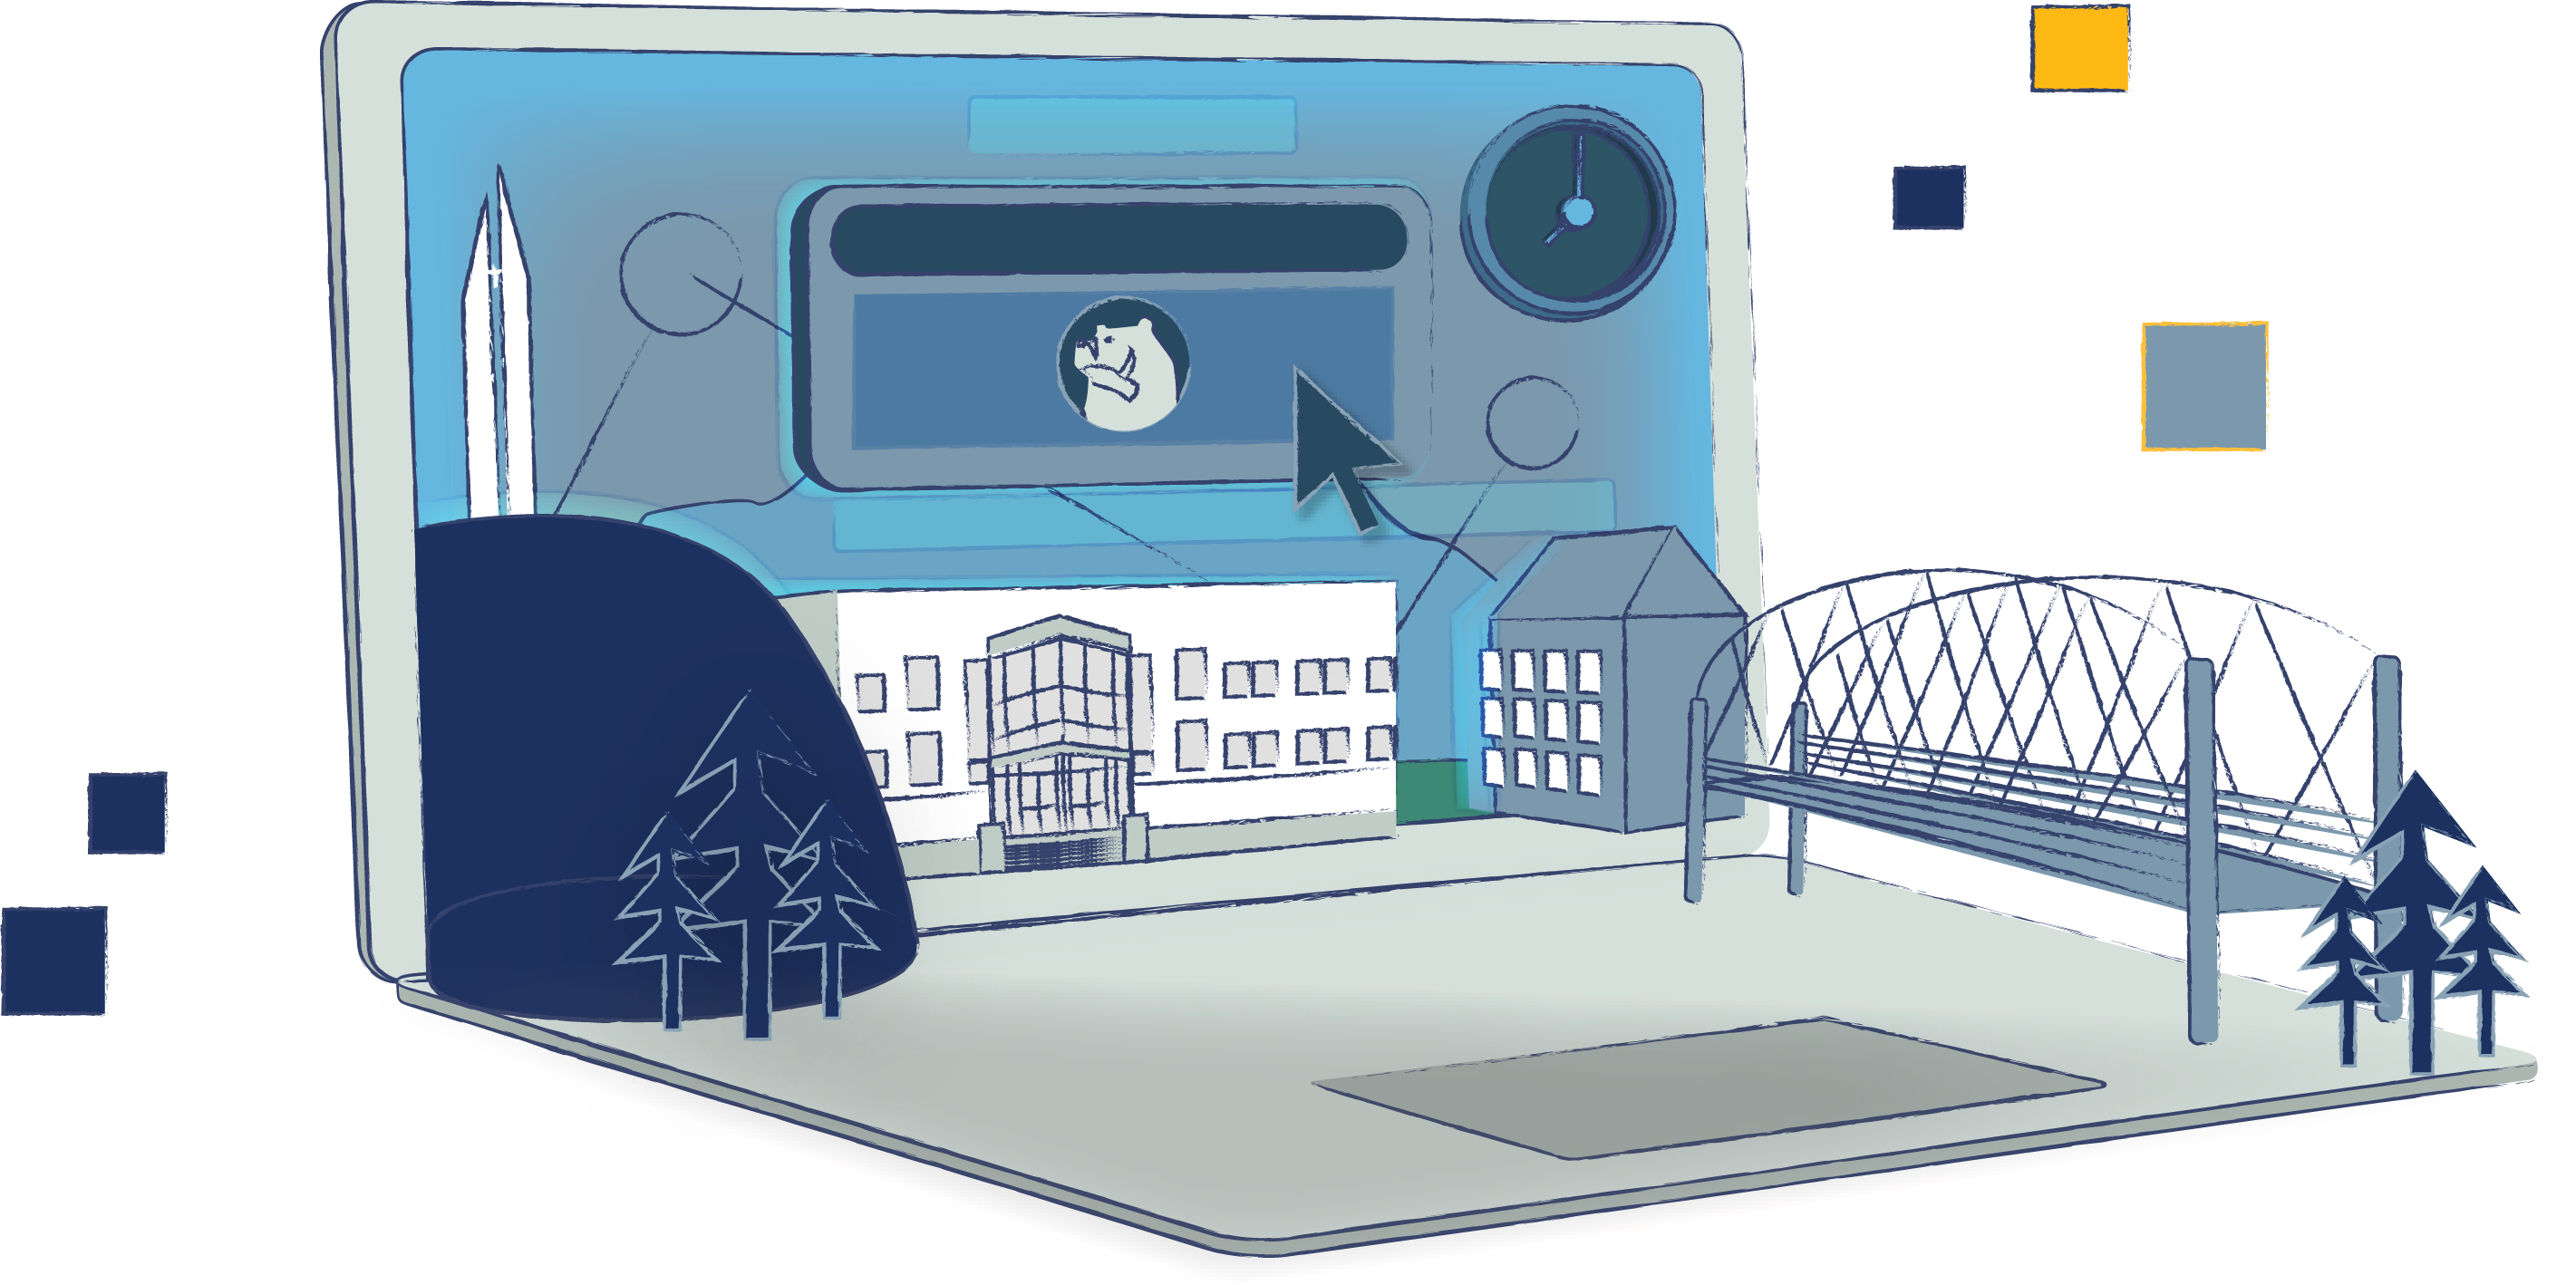 Illustration of a laptop with George Fox buildings on the screen